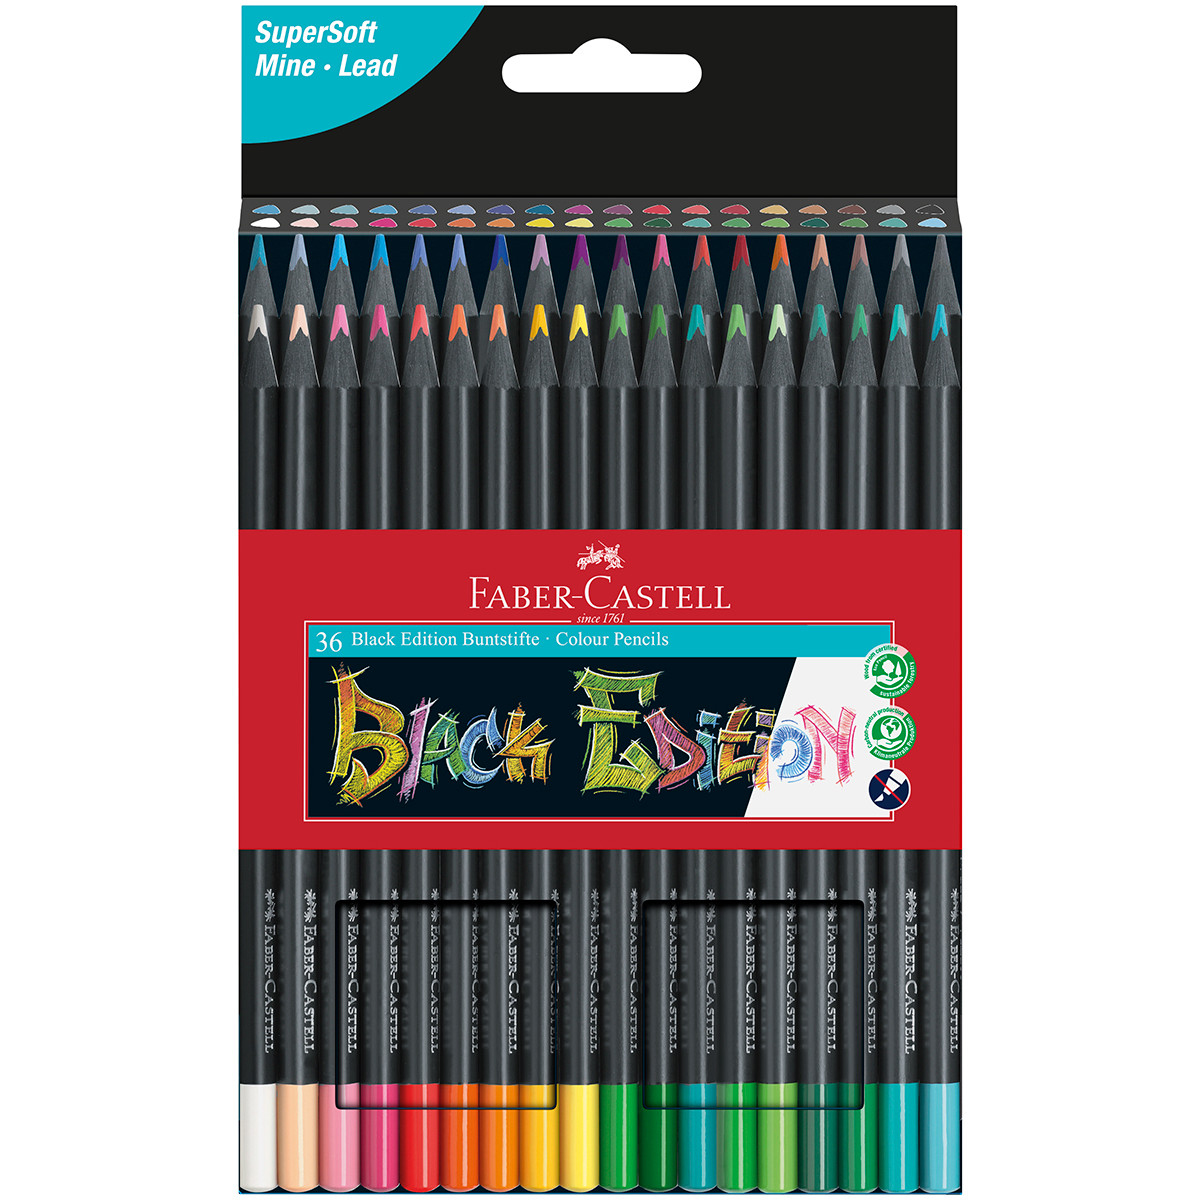 Faber-Castell Black Edition Colouring Pencils - Assorted Colours (Pack of 36)